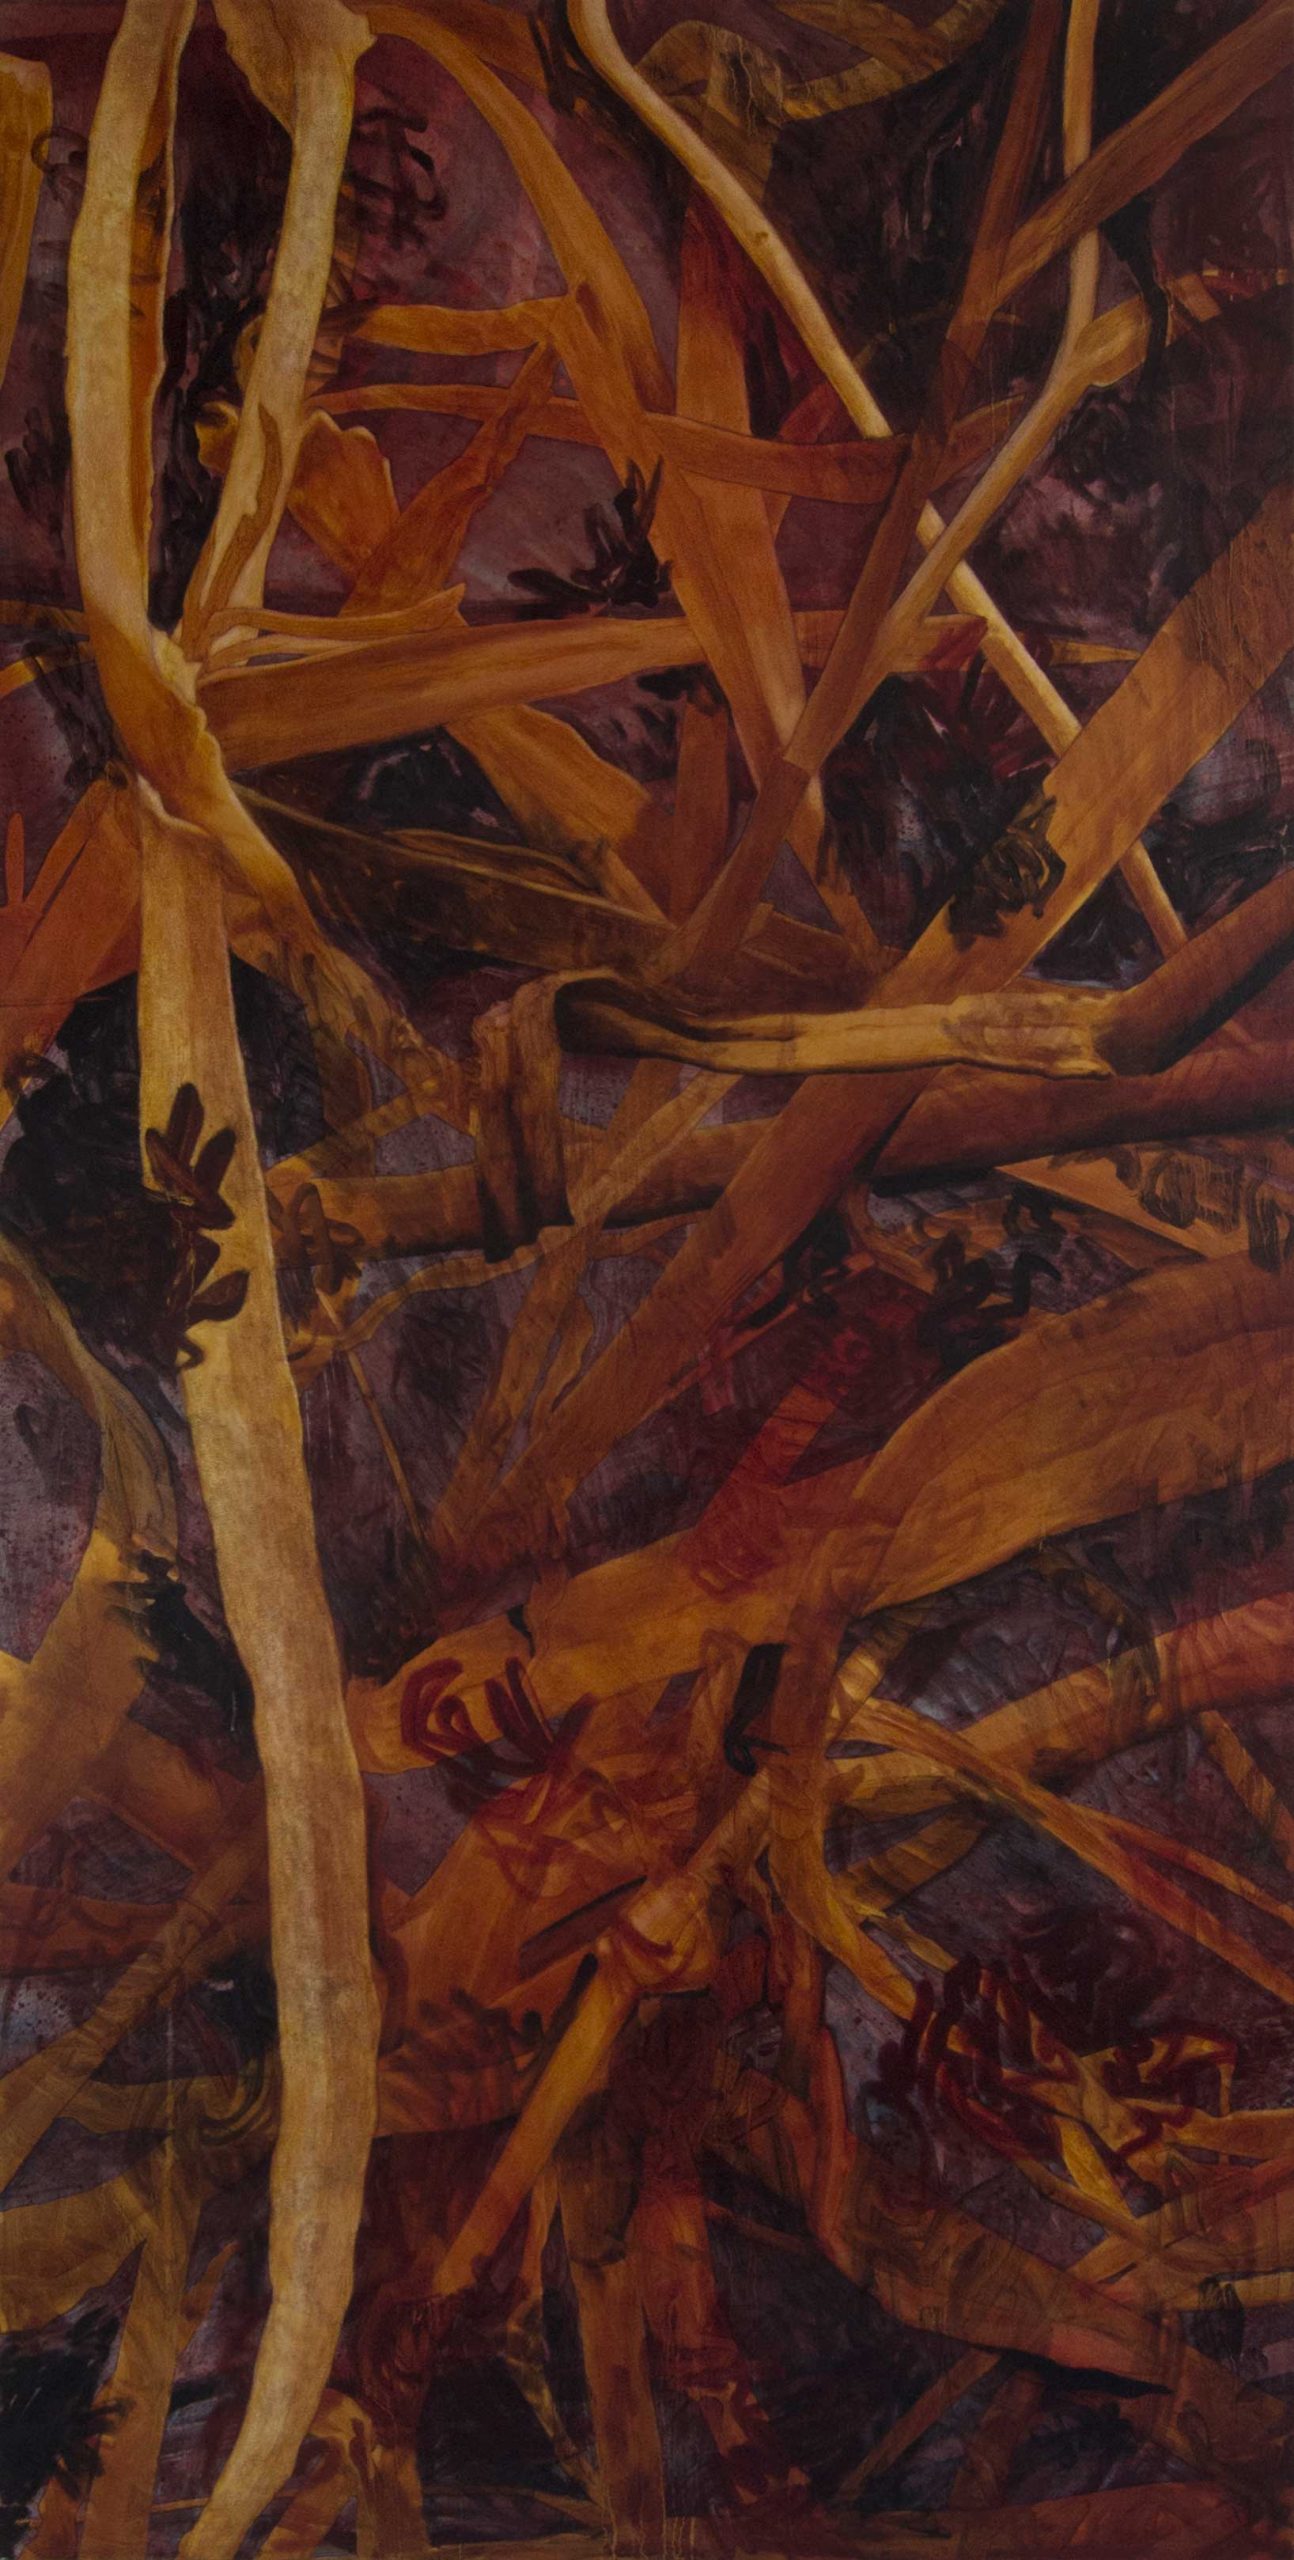 <p><strong>﻿Ragwort VII </strong><br /> Casein and oil on canvas - 90 x 180 cm   </p>